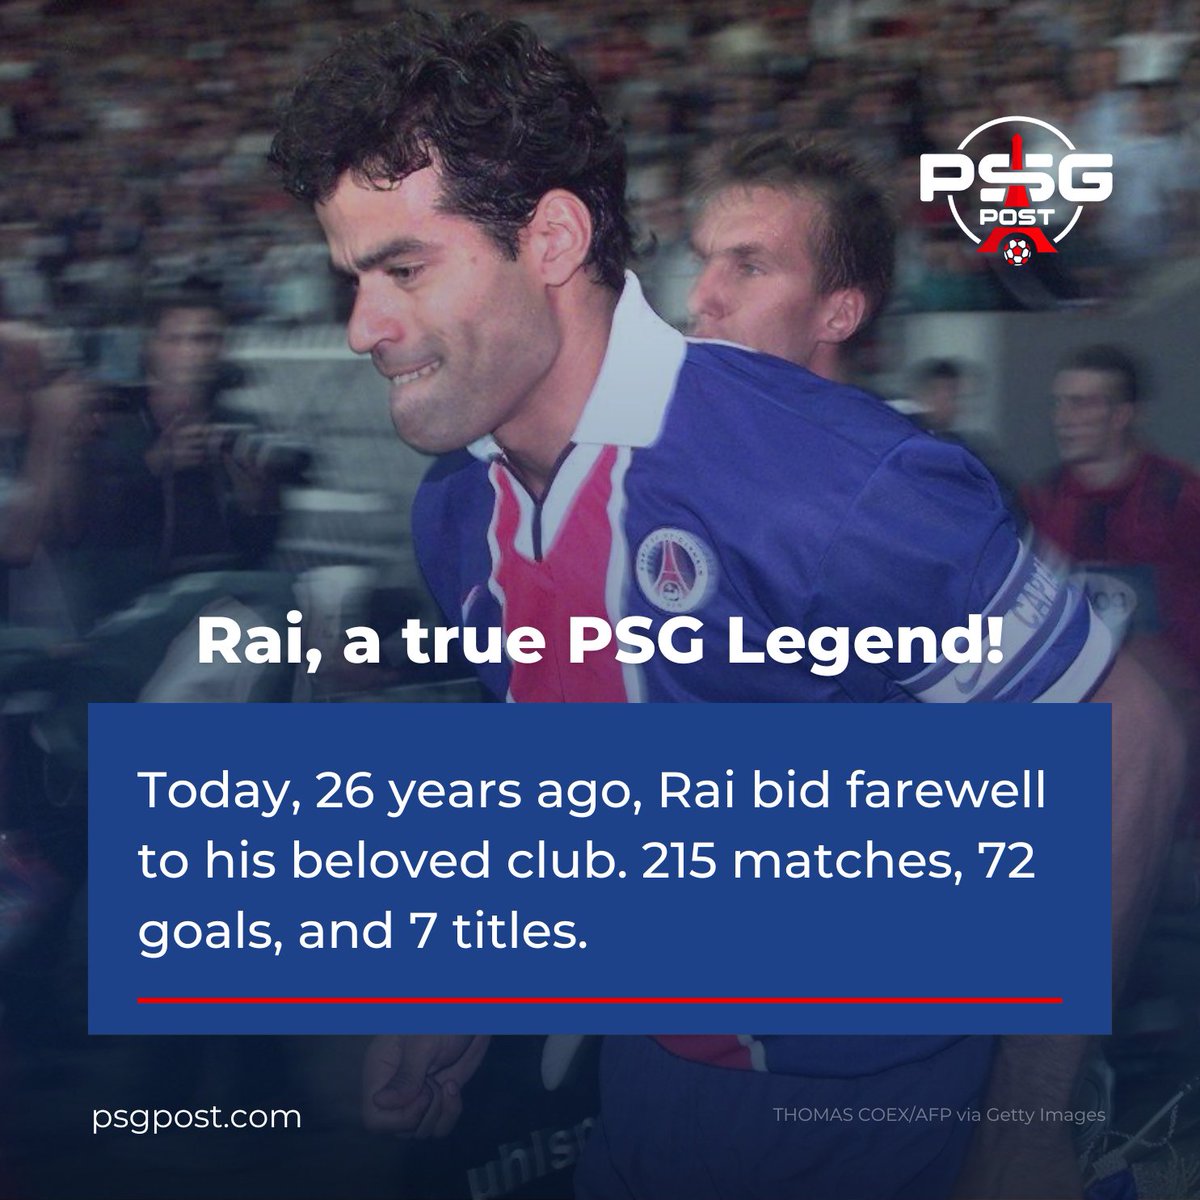 🇧🇷 Today, 26 years ago, Raí bid farewell to his beloved club. 215 matches, 72 goals, 7 titles. 

A true legend of PSG! 🔴🔵

#PSG #PSGLegend